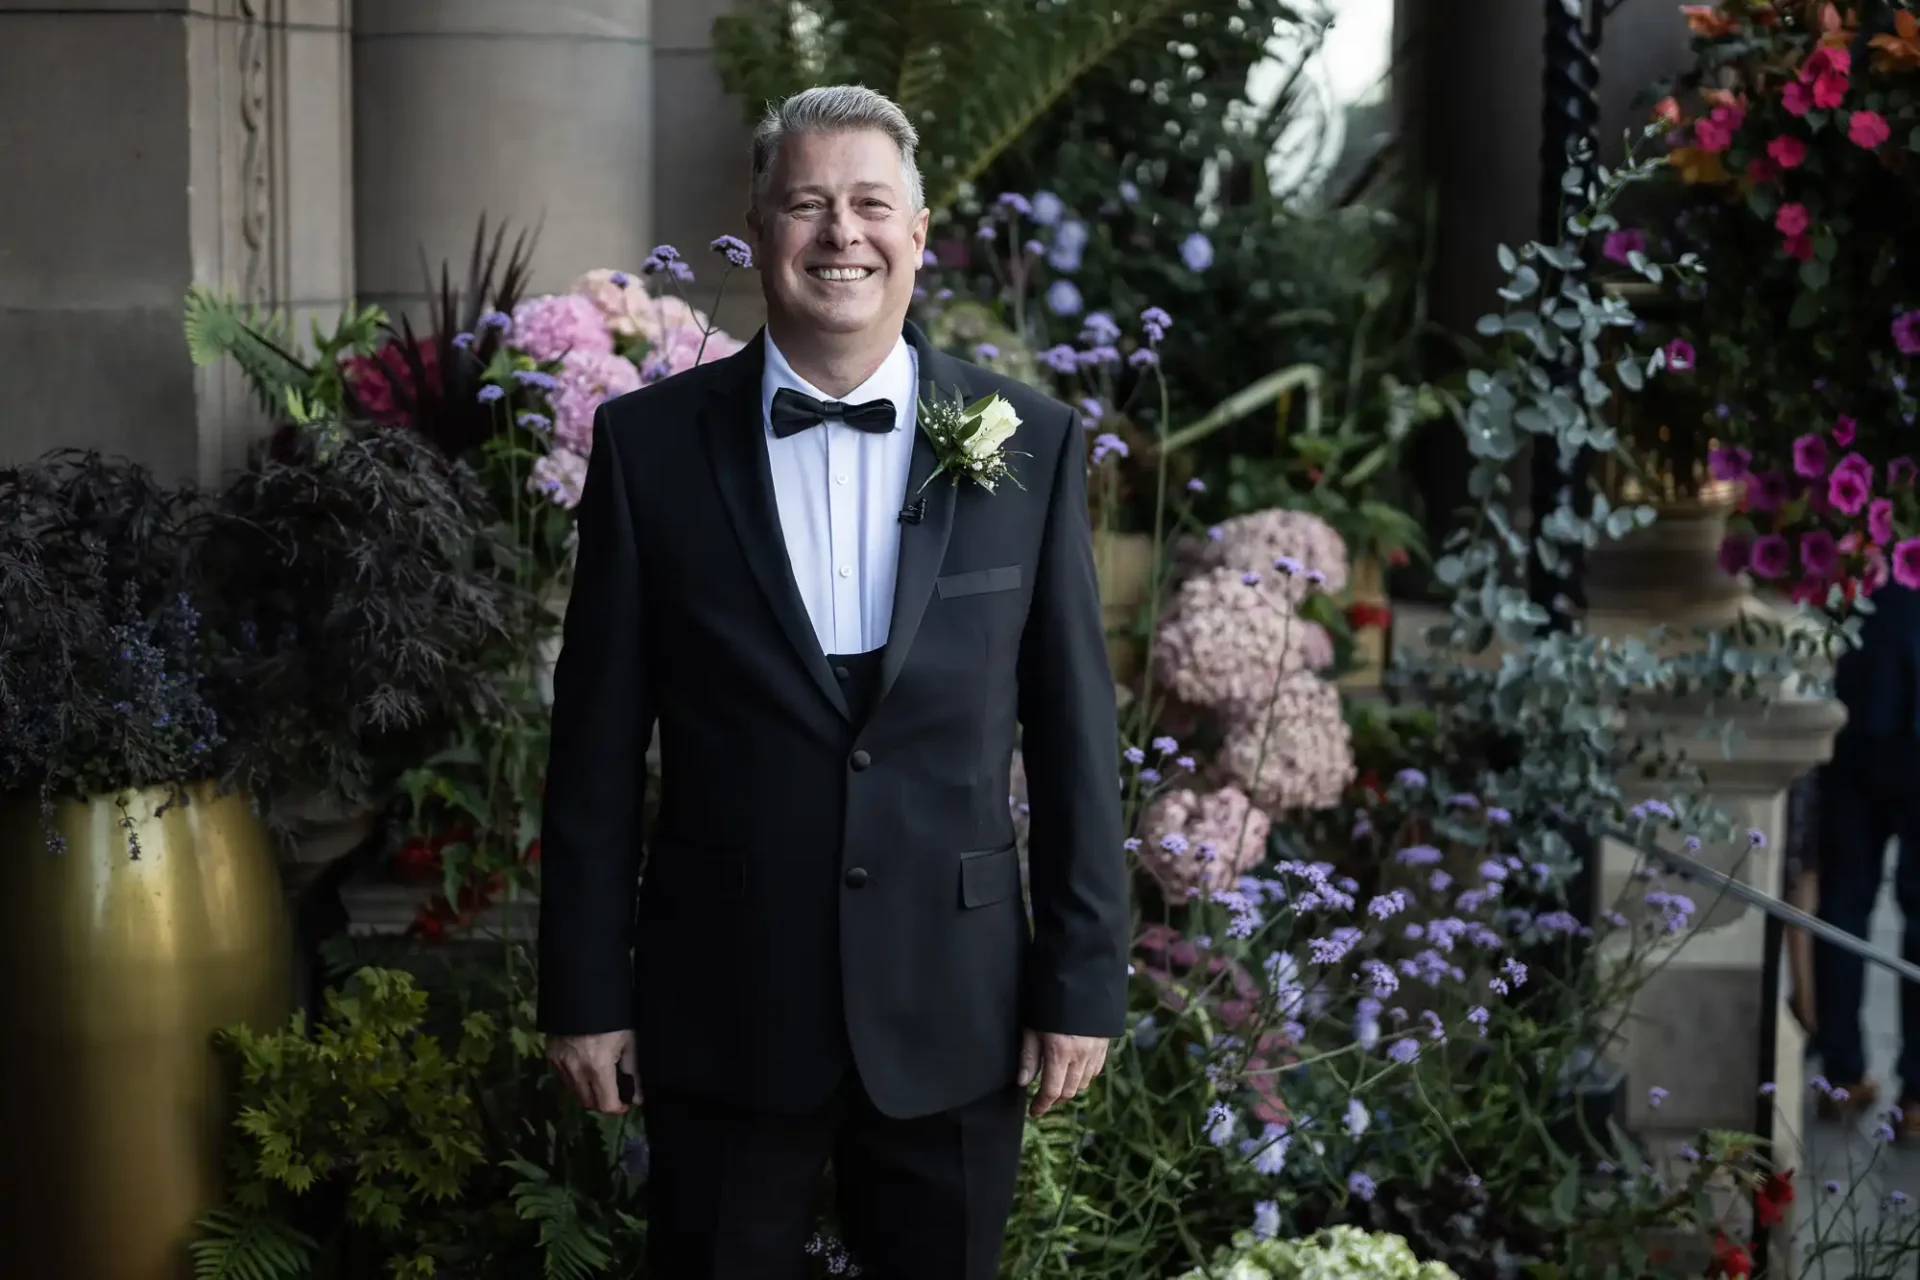 A smiling man in a black tuxedo and bow tie stands in front of a floral arrangement.